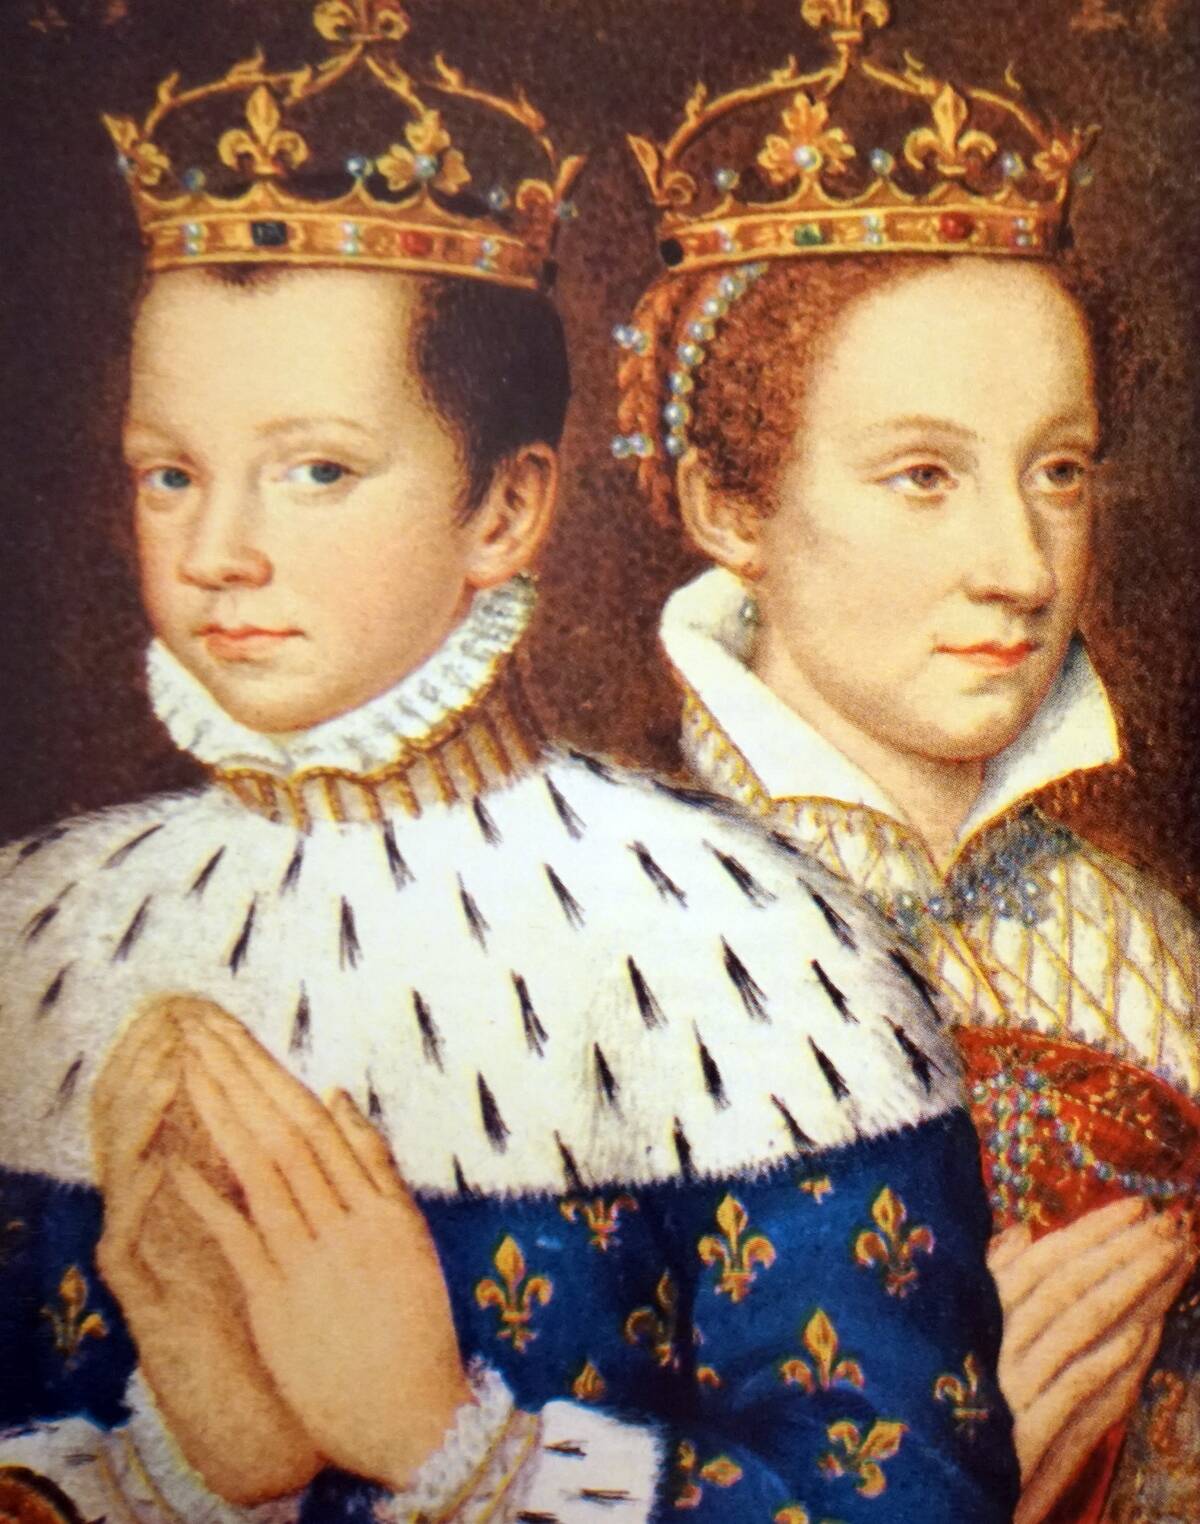 <p>Mary and Francis lived a charmed life and got along well growing up together. They formally married when she was 16 and he was 14 in 1558. A year later, they both became King and Queen of France when Henry II died in a freak jousting accident. </p> <p>Their reign came to an abrupt end in 1560 when Francis contracted a middle ear infection. It got so bad that an abscess formed in his brain and killed him. His ten-year-old brother ascended the throne and a grief-stricken Mary returned to her native Scotland nine months later. </p>